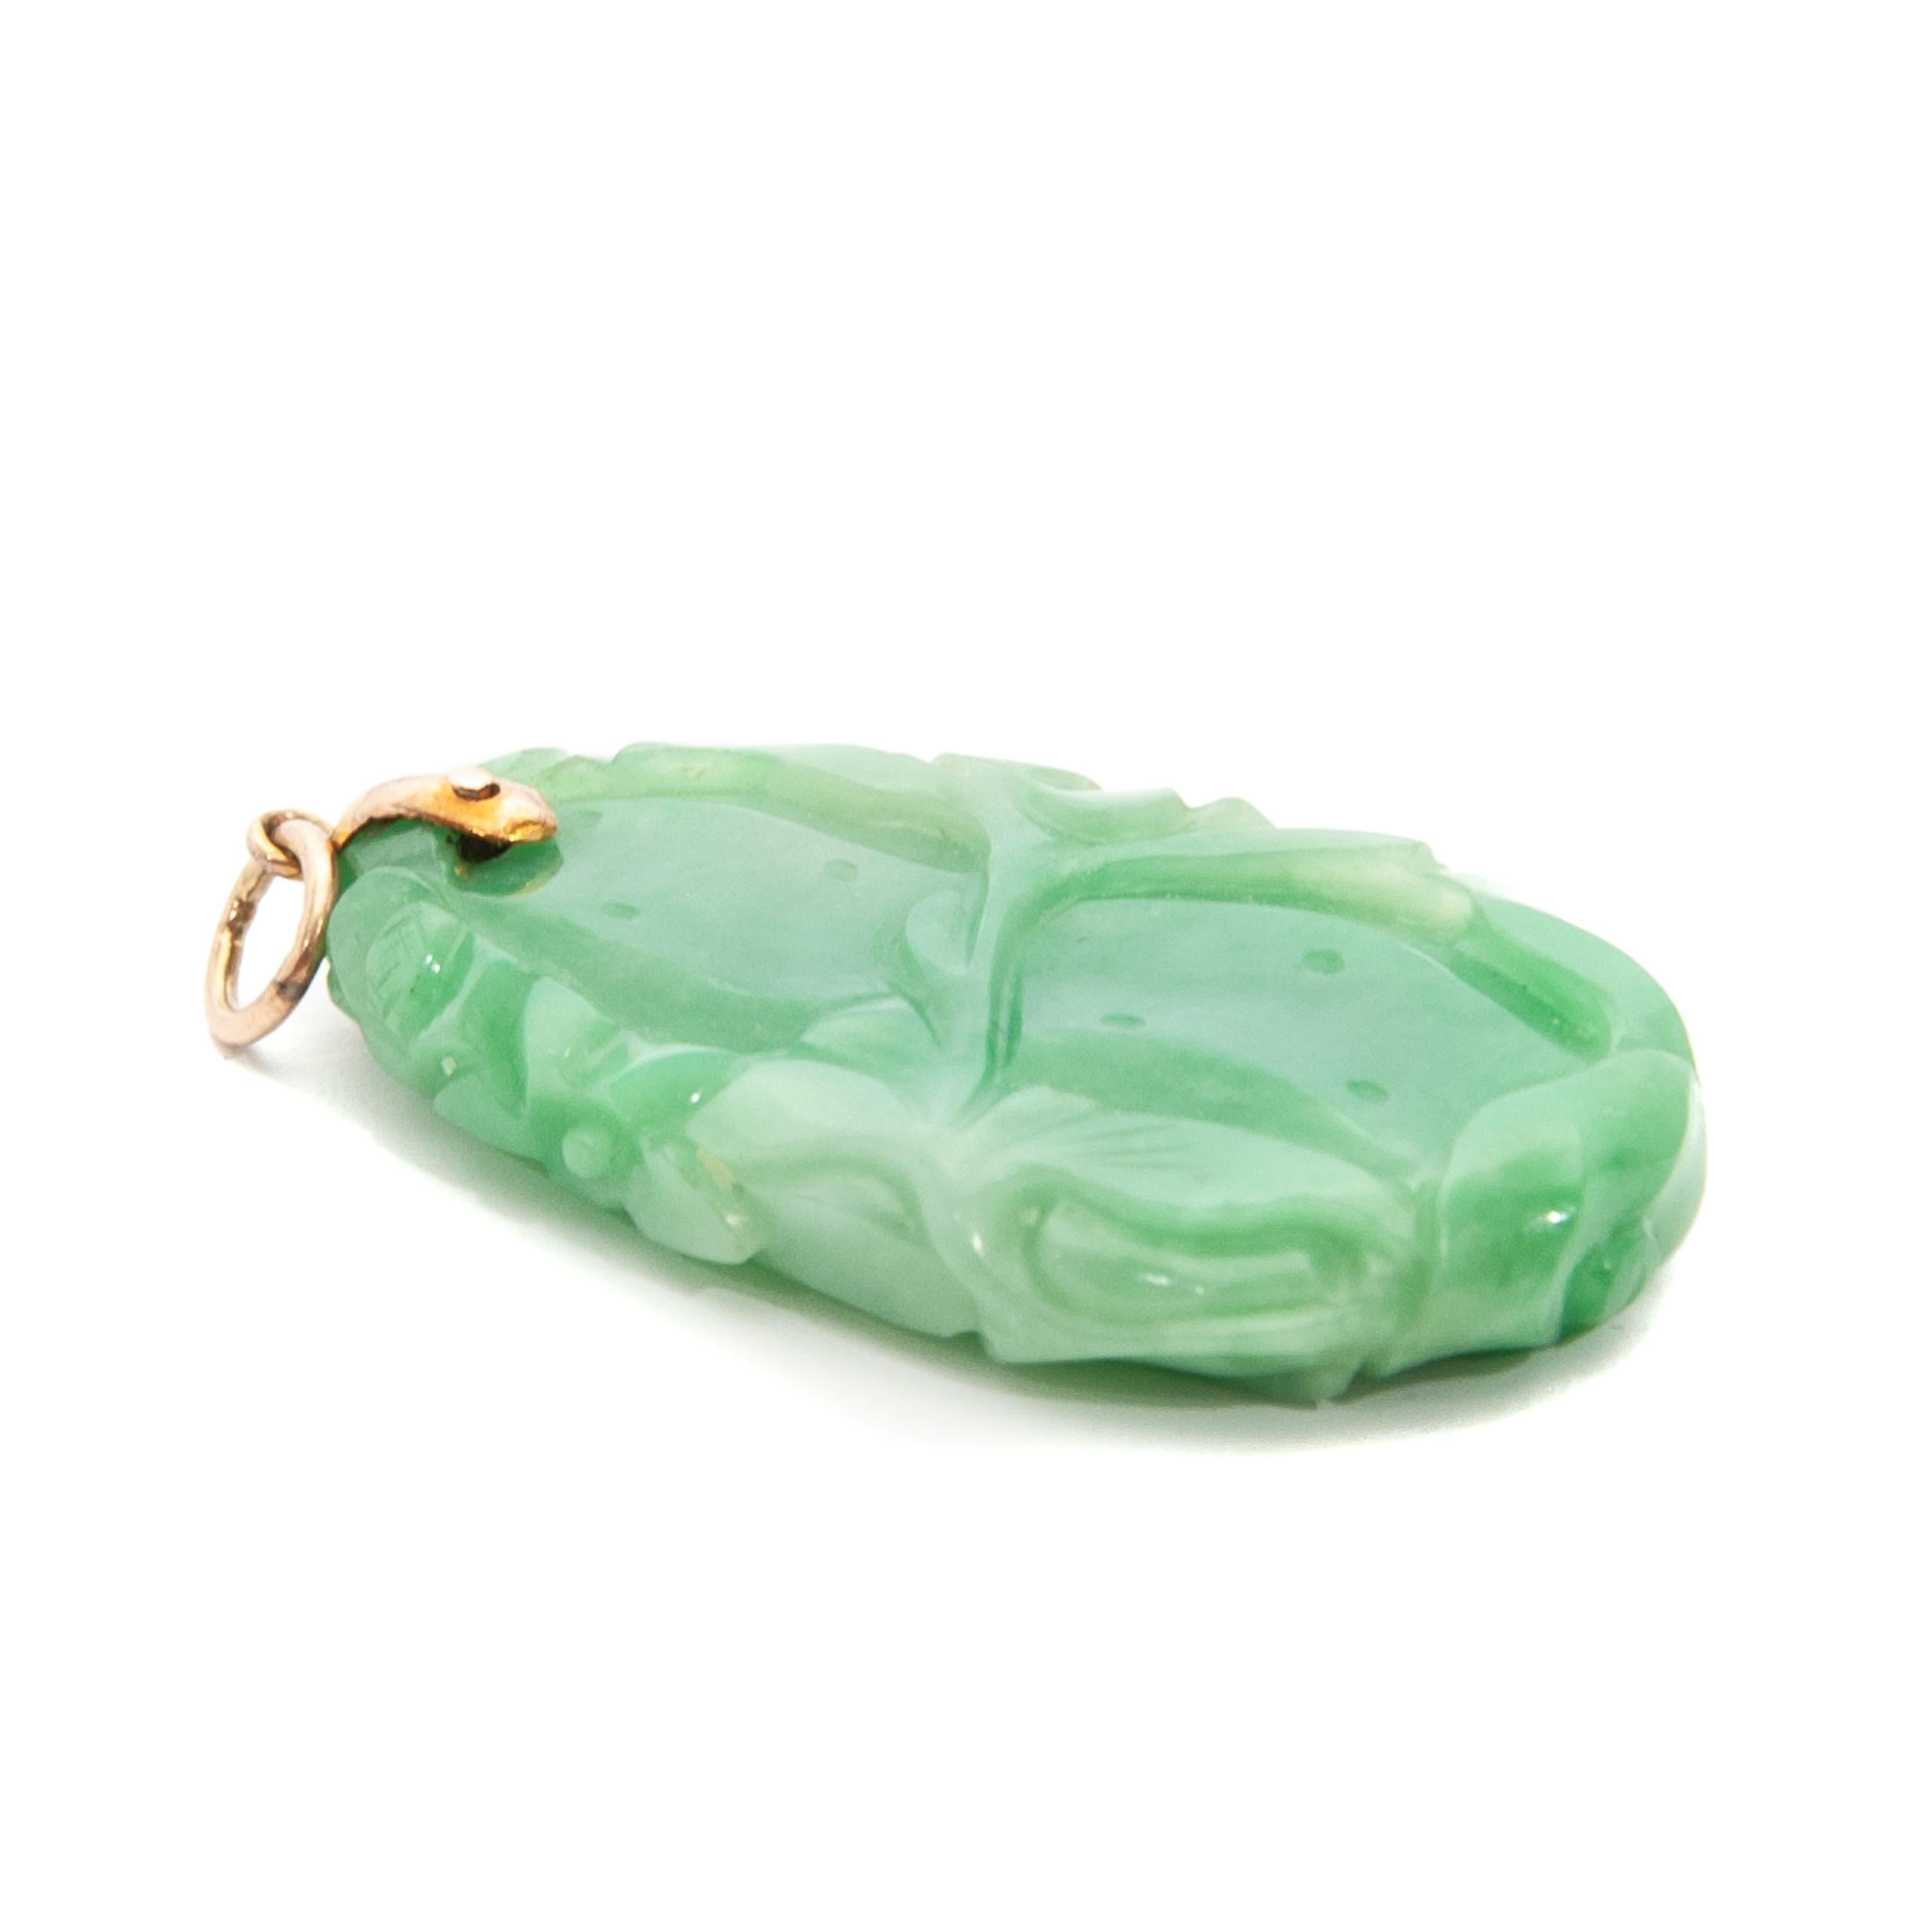 Oval Cut Fish and Floral Carved Green Jade Pendant